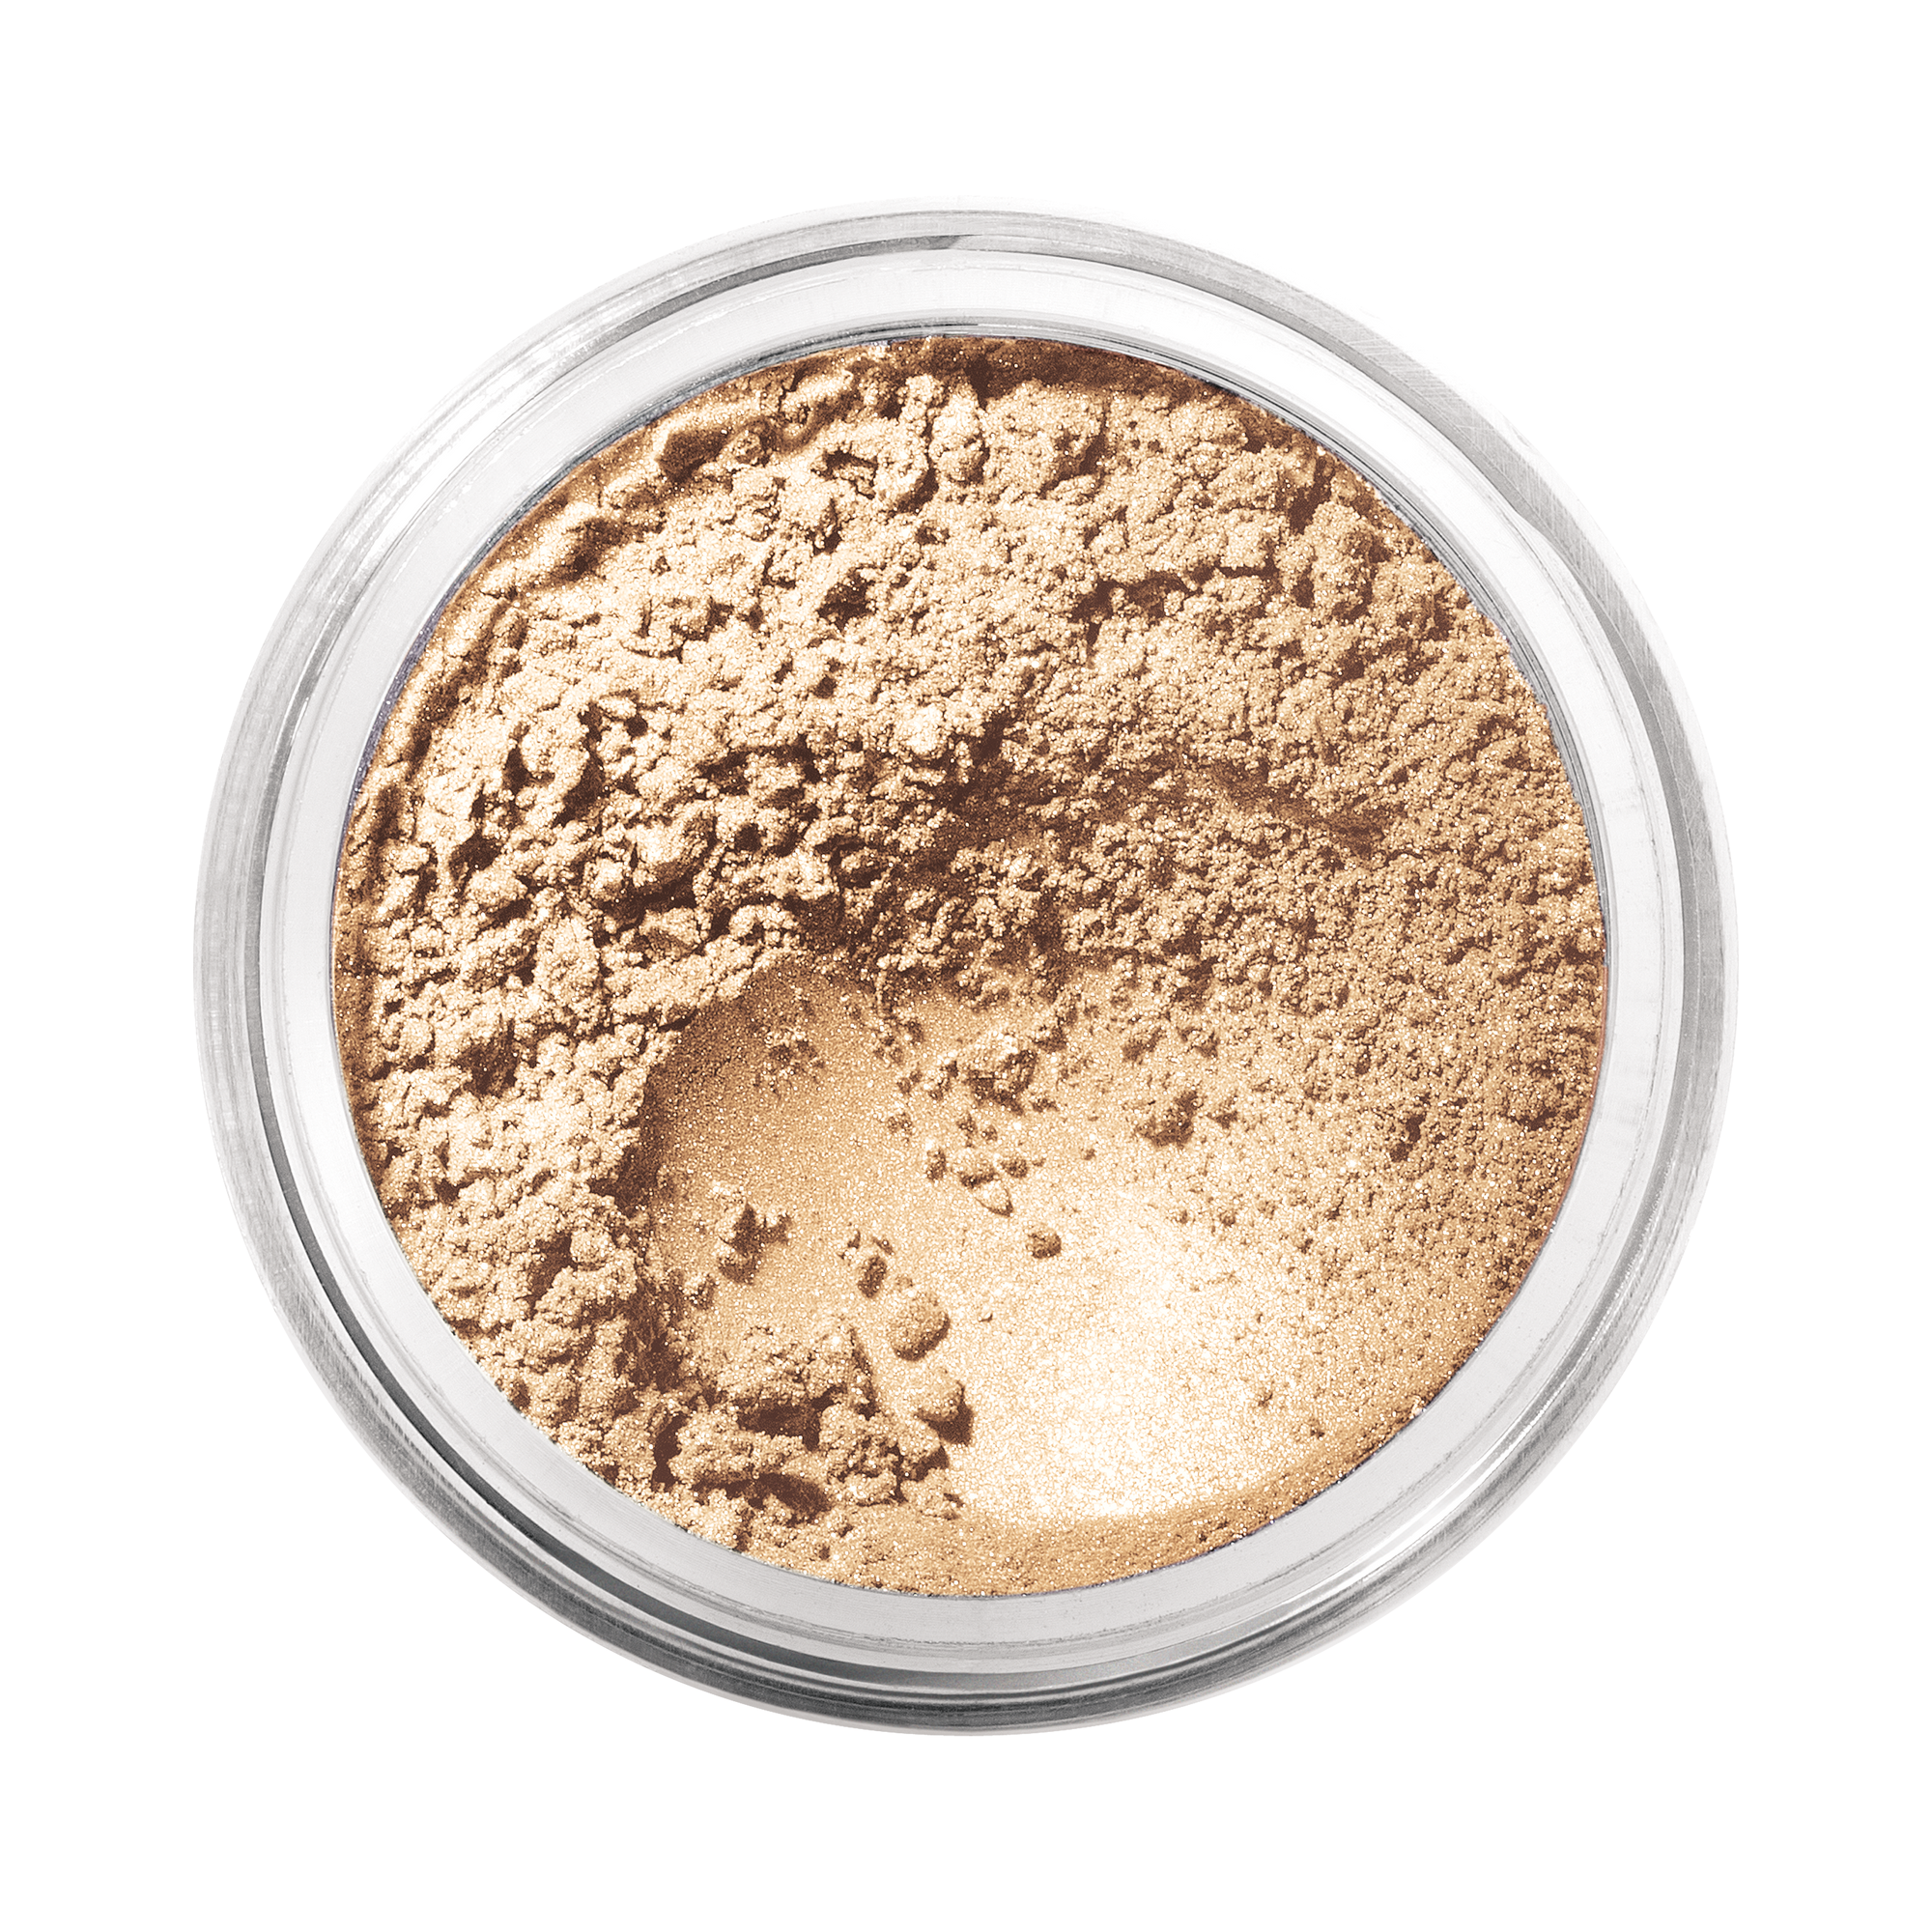 bareMinerals Loose Mineral Eyecolor / QUEEN PHYLLIS